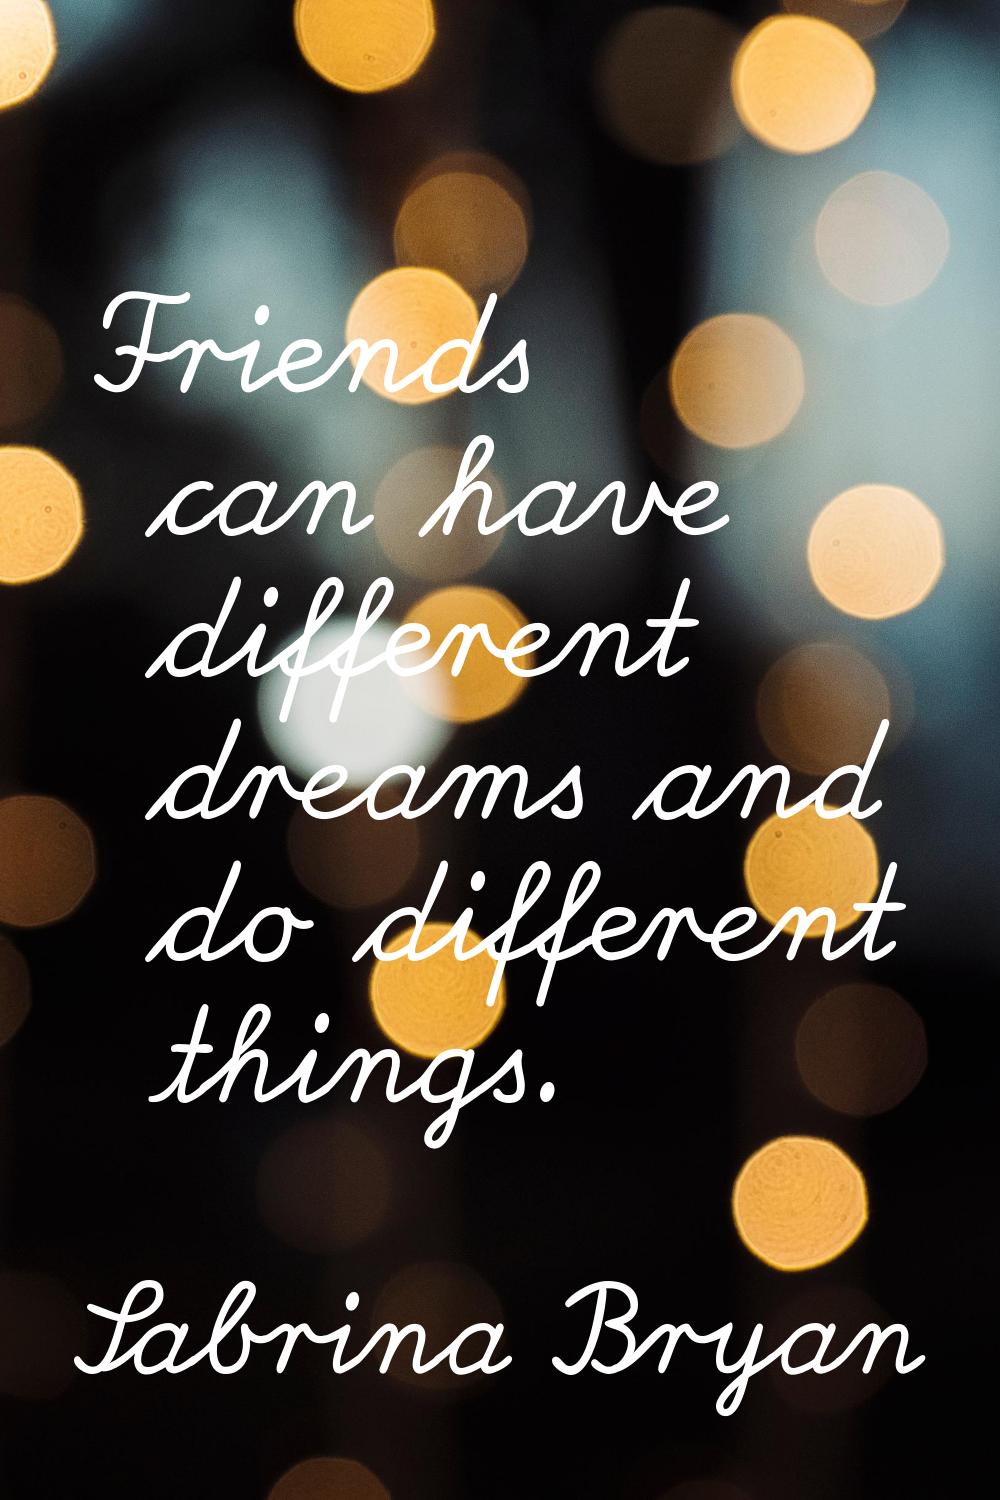 Friends can have different dreams and do different things.